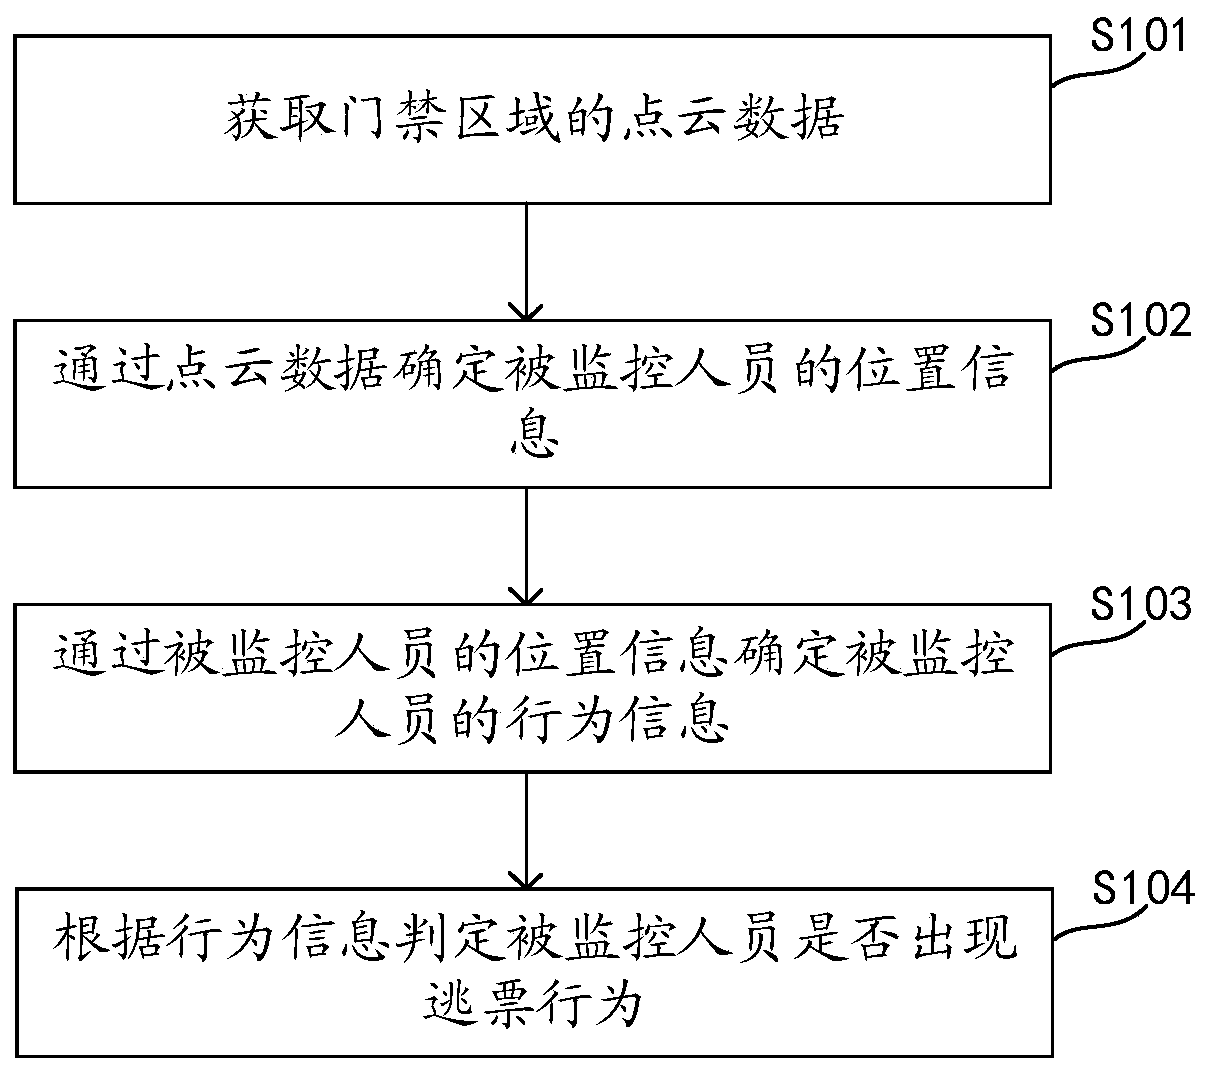 Fare evasion detection method and related device